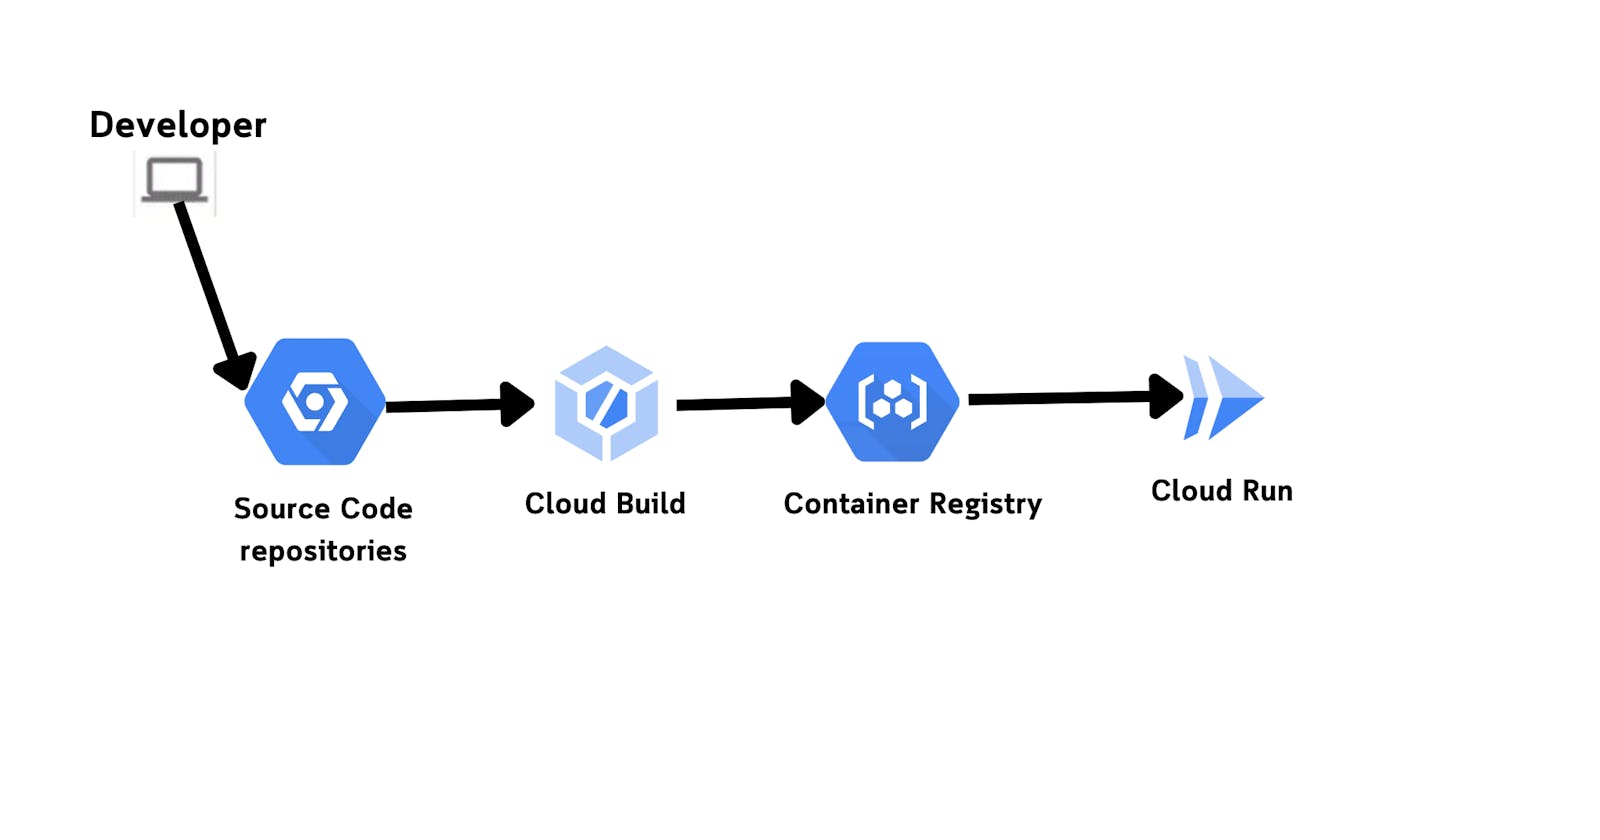 Continuous Deployment to Cloud Run using Cloud Build